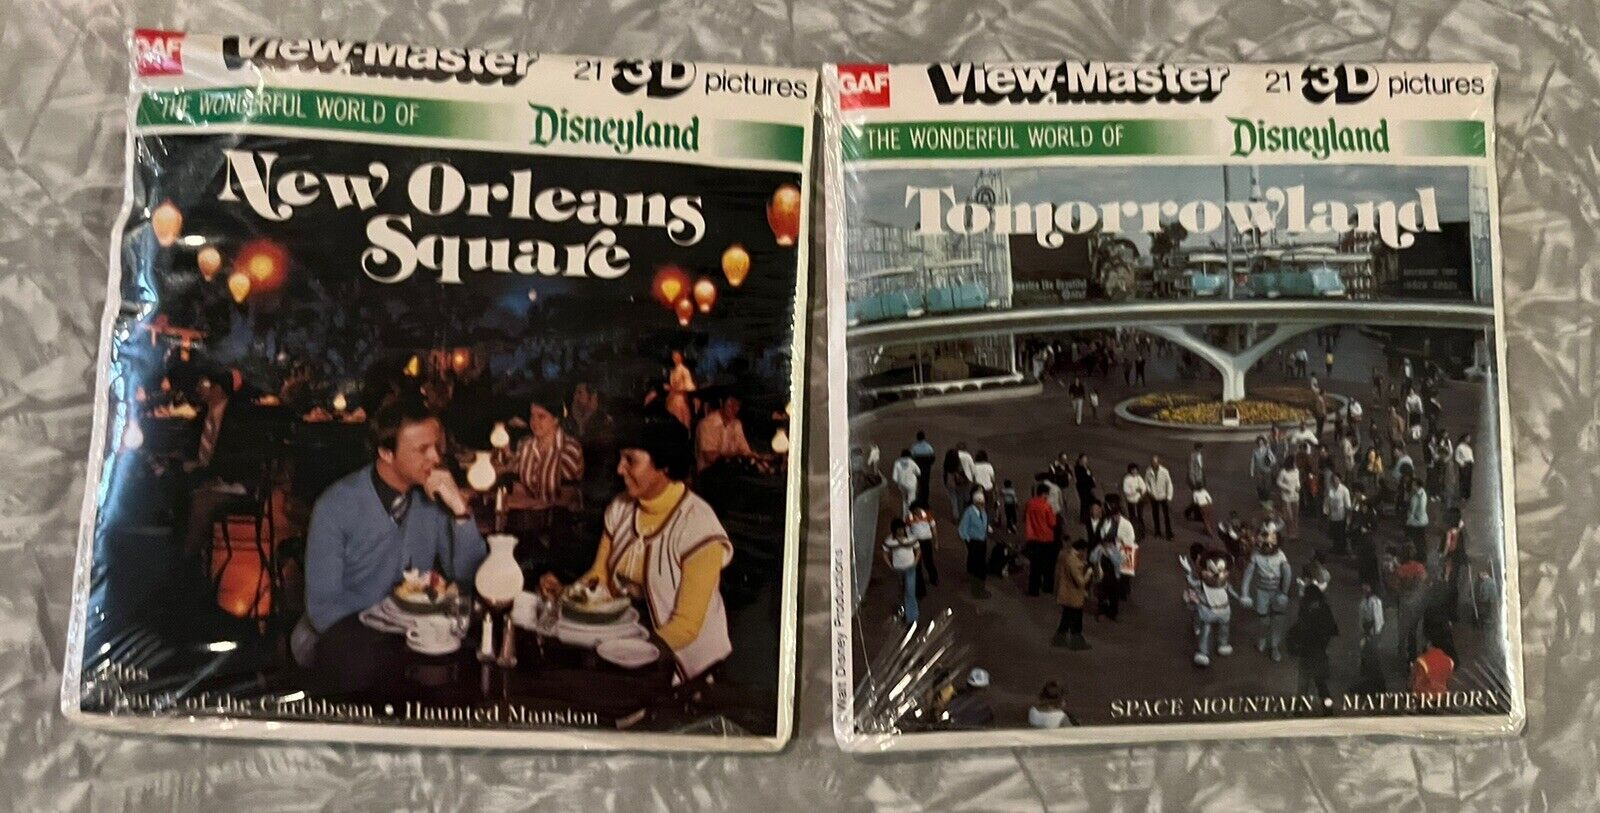 Rare Disneyland View-Master 3D Reels: New Orleans Square & Tomorrowland: Sealed